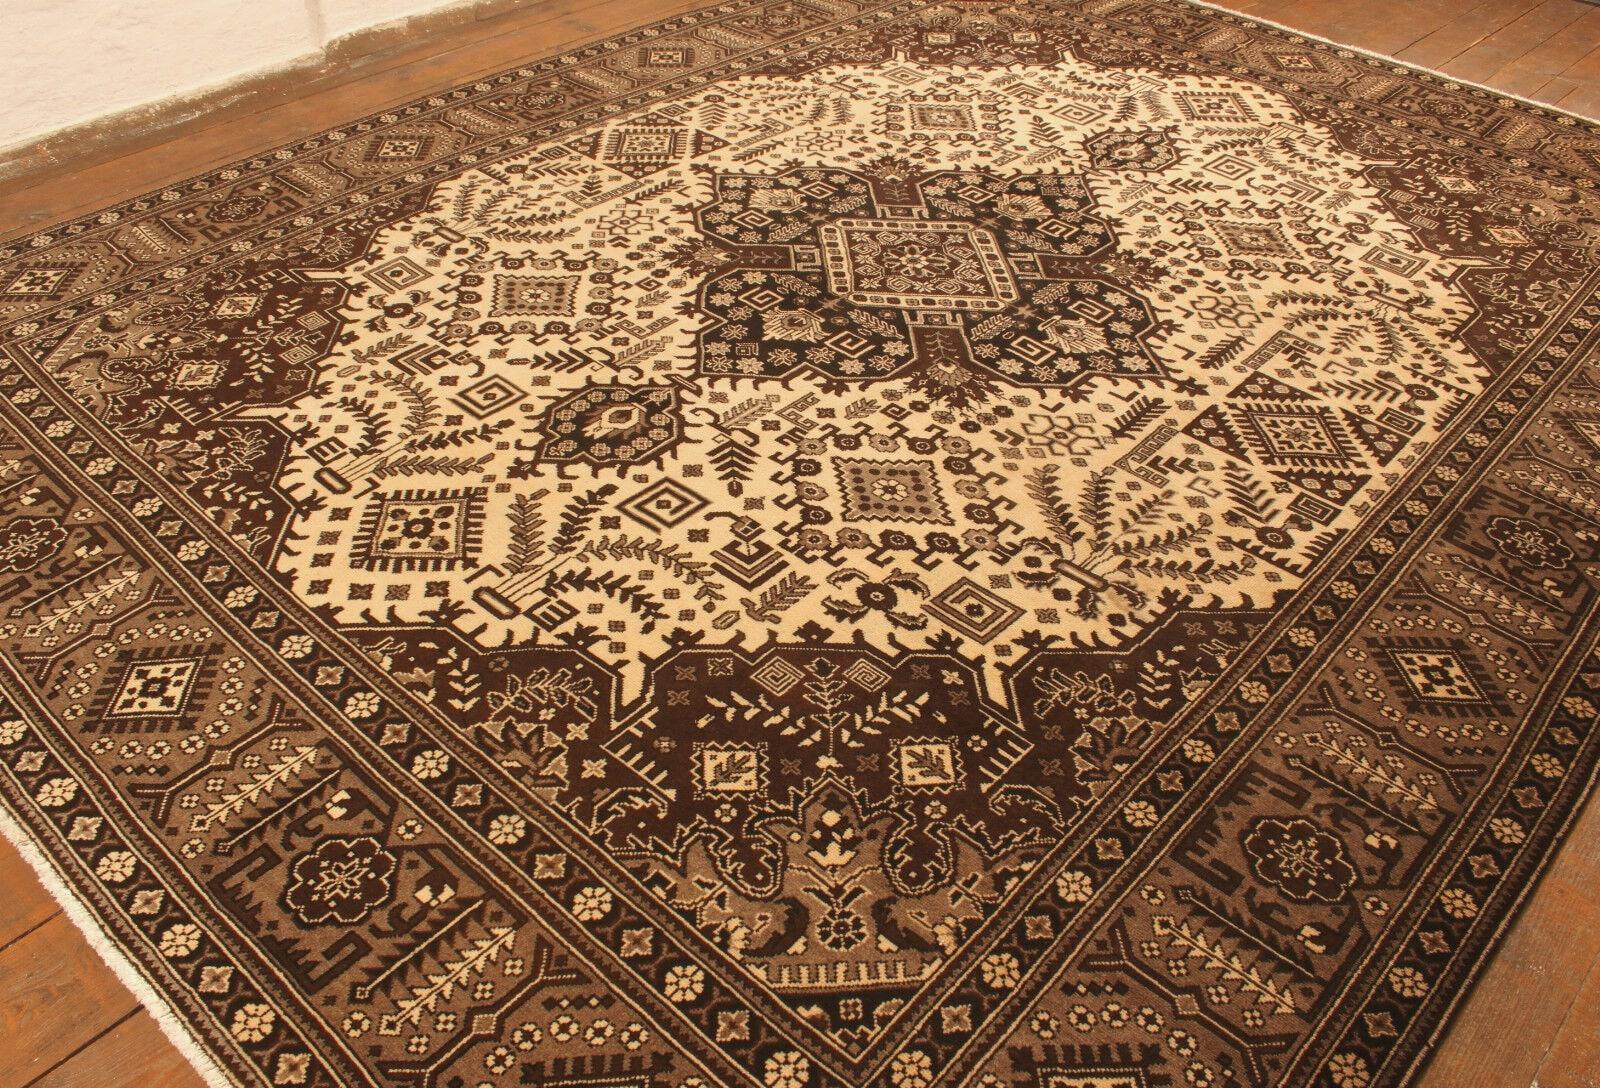 Handmade Vintage Persian Style Tabriz Rug 10' x 12.8', 1970s - 1T40 In Good Condition For Sale In Bordeaux, FR